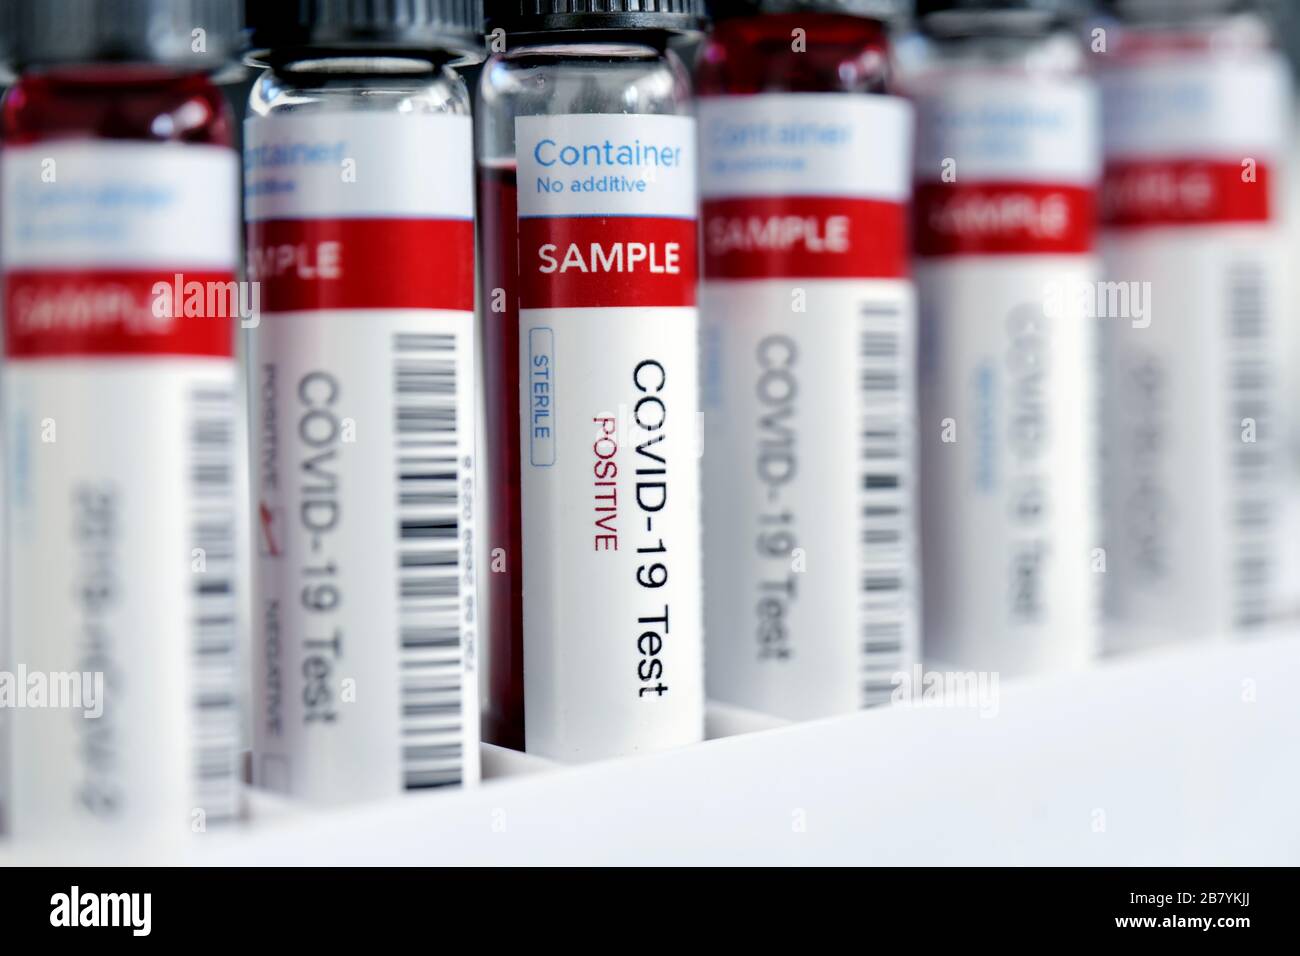 Testing for presence of coronavirus. Many tubes containing blood samples that have tested positive for COVID-19. Stock Photo